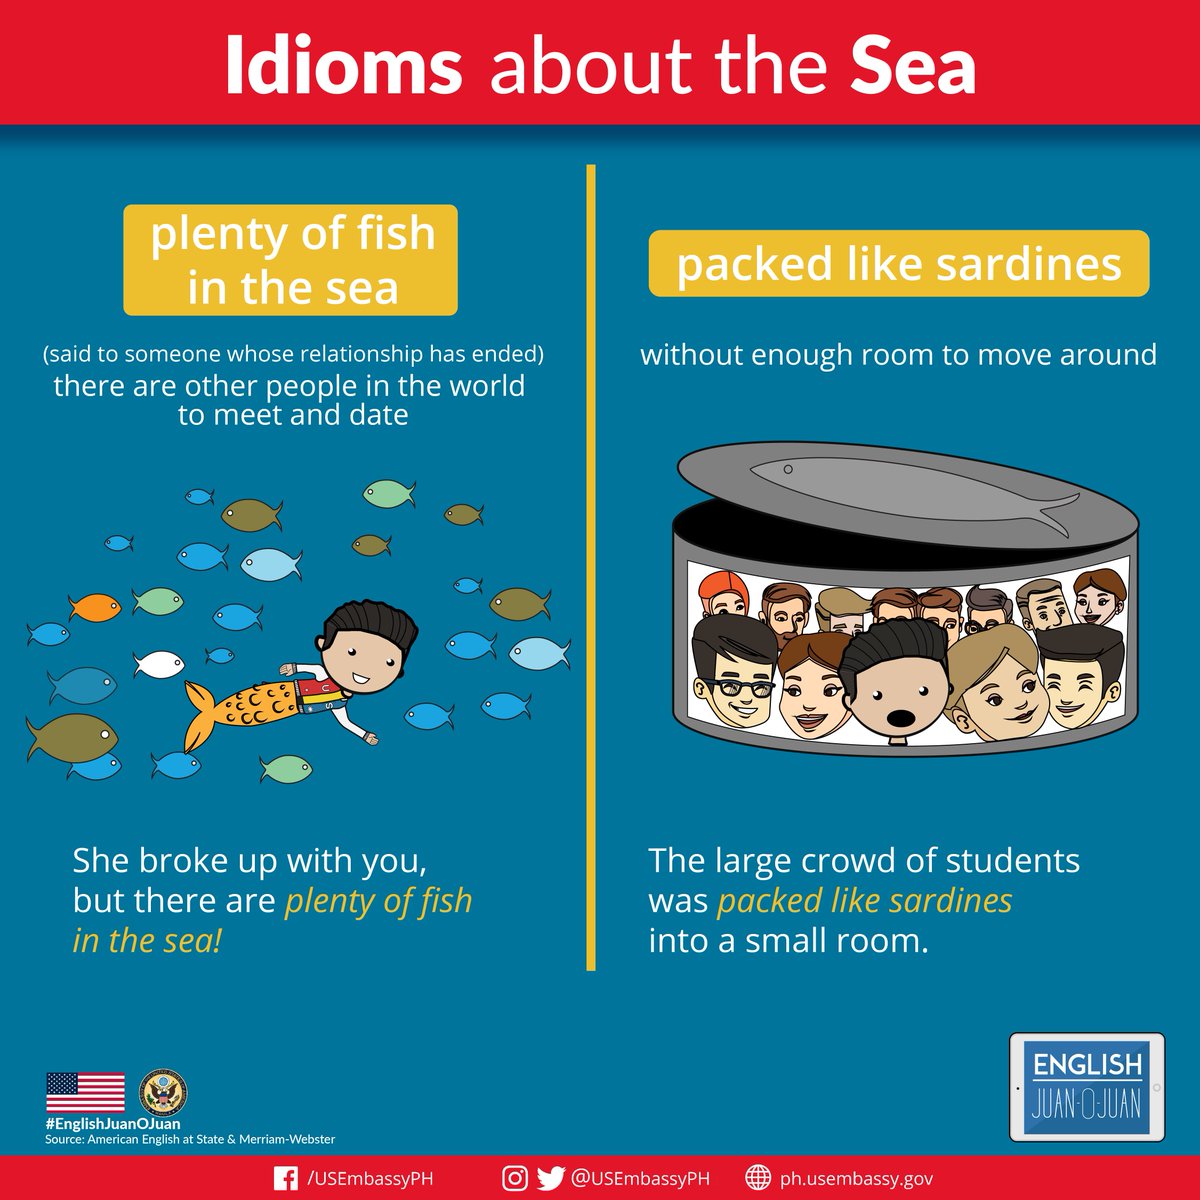 Has a friend ever told you that there are plenty of fish in the sea after a break up? Since it’s #OceanMonth, let’s learn these idioms about the sea in #EnglishJuanOJuan! #AmericanEnglish